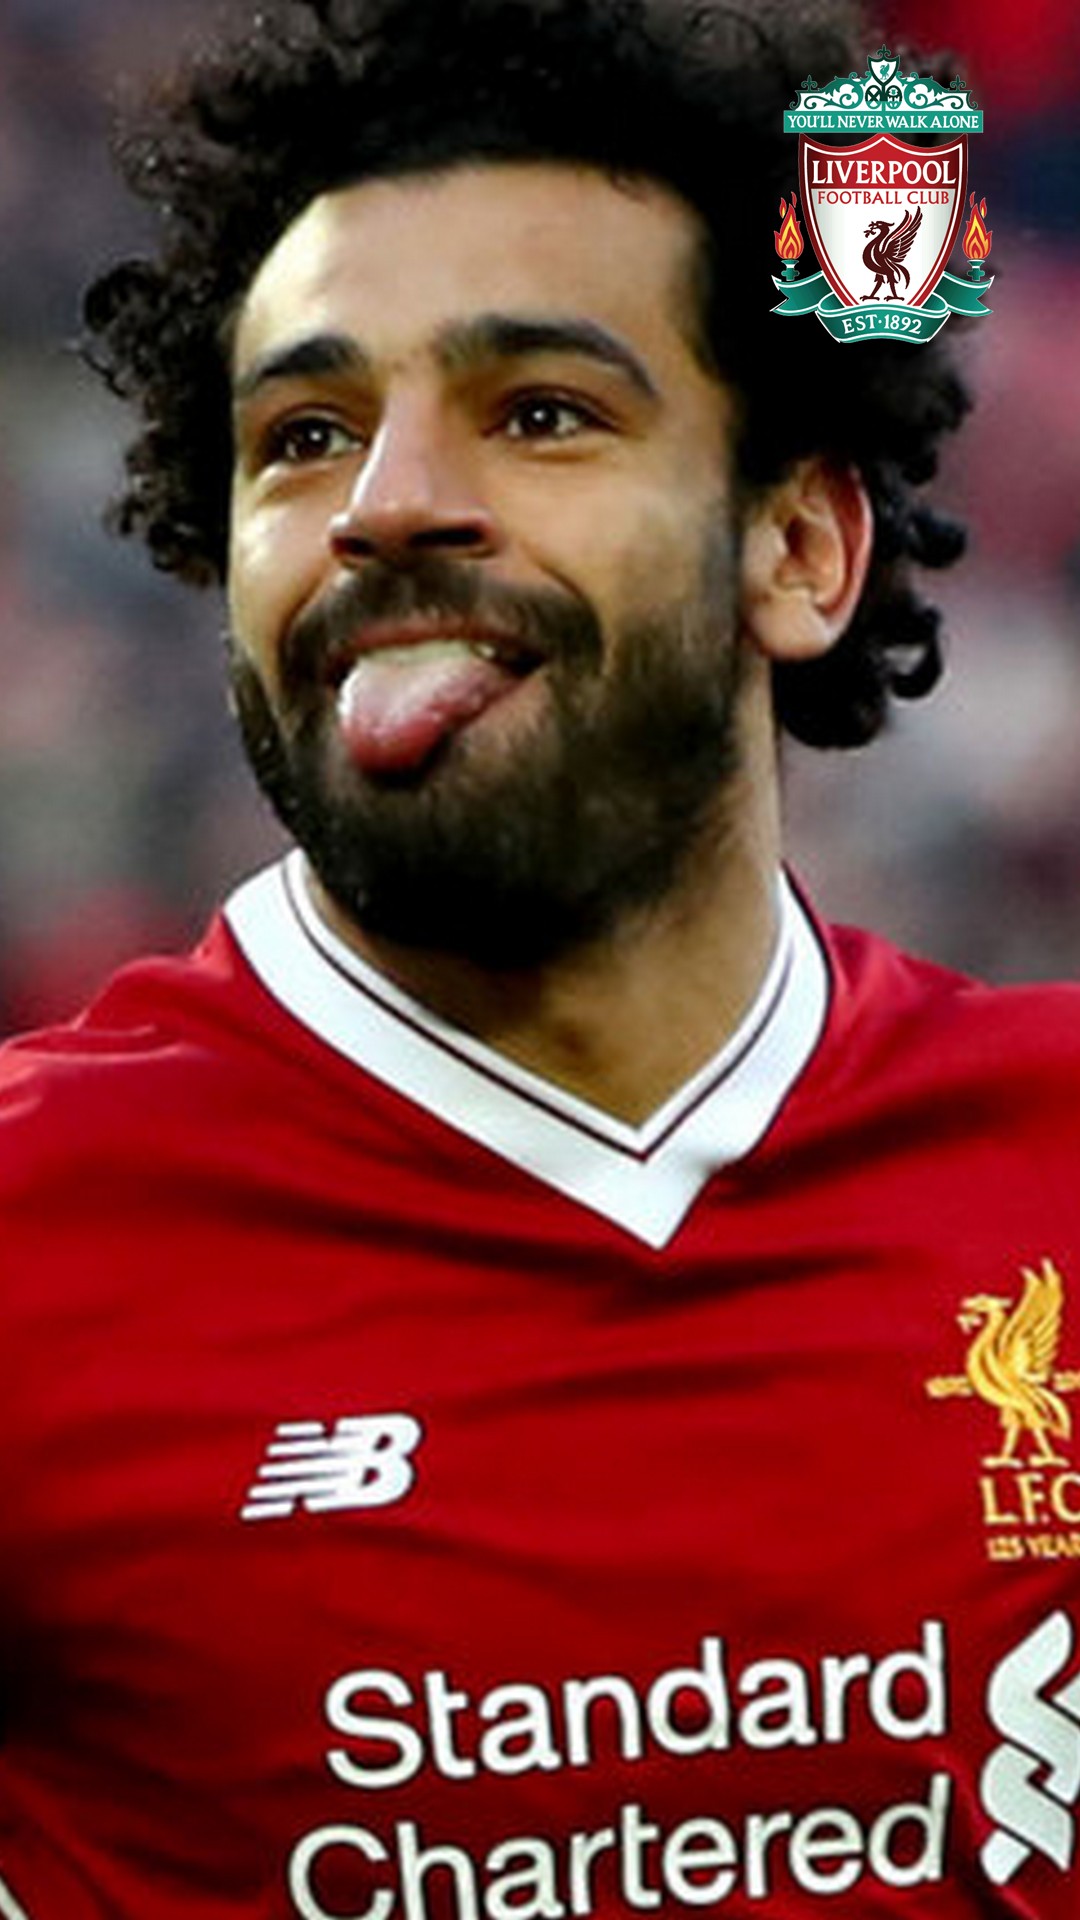 Android Wallpaper HD Salah Liverpool with image resolution 1080x1920 pixel. You can make this wallpaper for your Android backgrounds, Tablet, Smartphones Screensavers and Mobile Phone Lock Screen